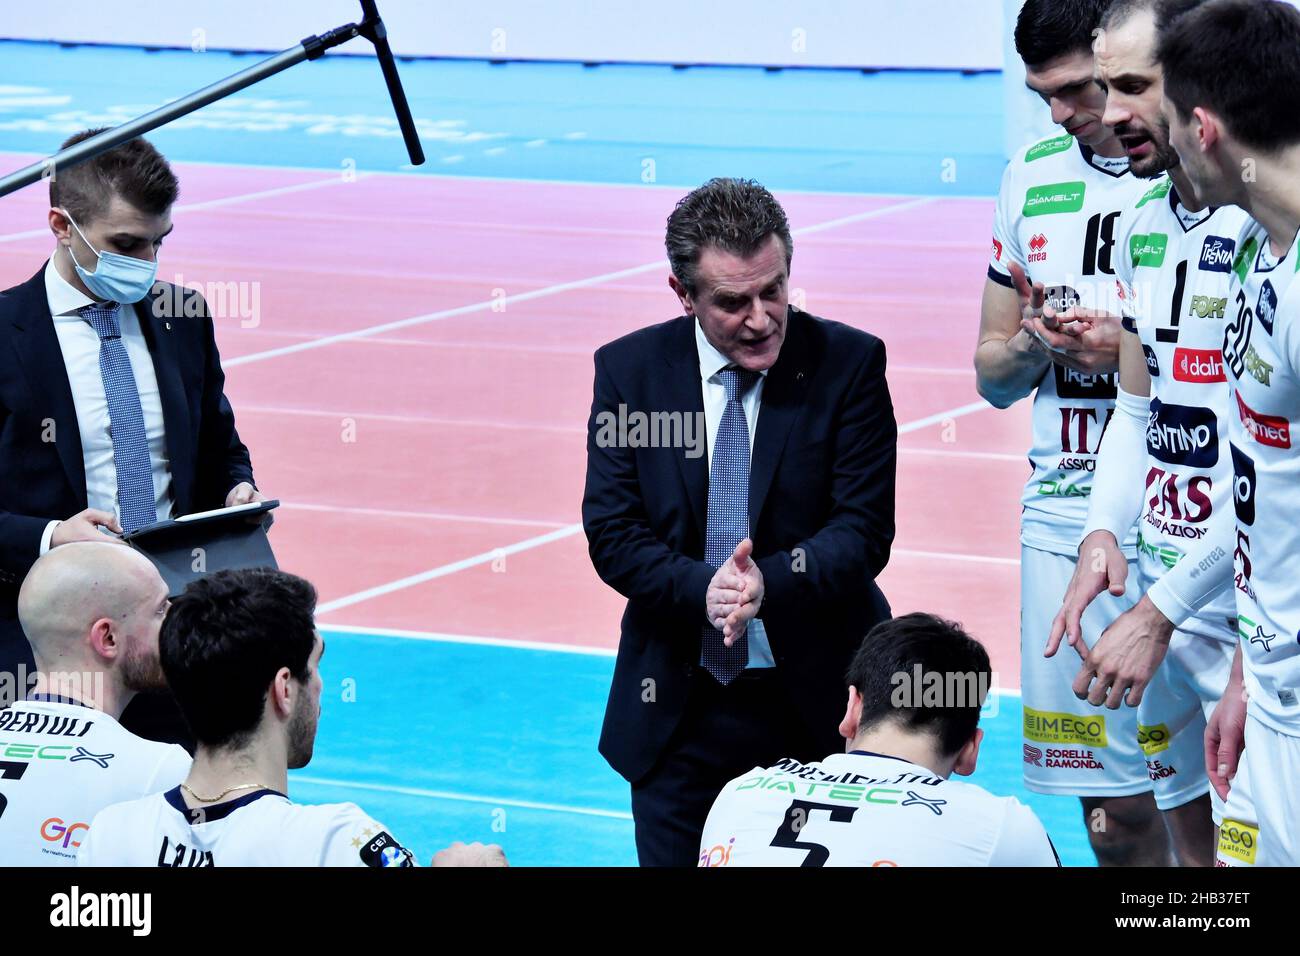 Trento, Italy. 16th Dec, 2021. Coach Angelo Lorenzetti (Itas Trentino) during Itas Trentino vs Fenerbahce HDI Istanbul, CEV Champions League volleyball match in Trento, Italy, December 16 2021 Credit: Independent Photo Agency/Alamy Live News Stock Photo